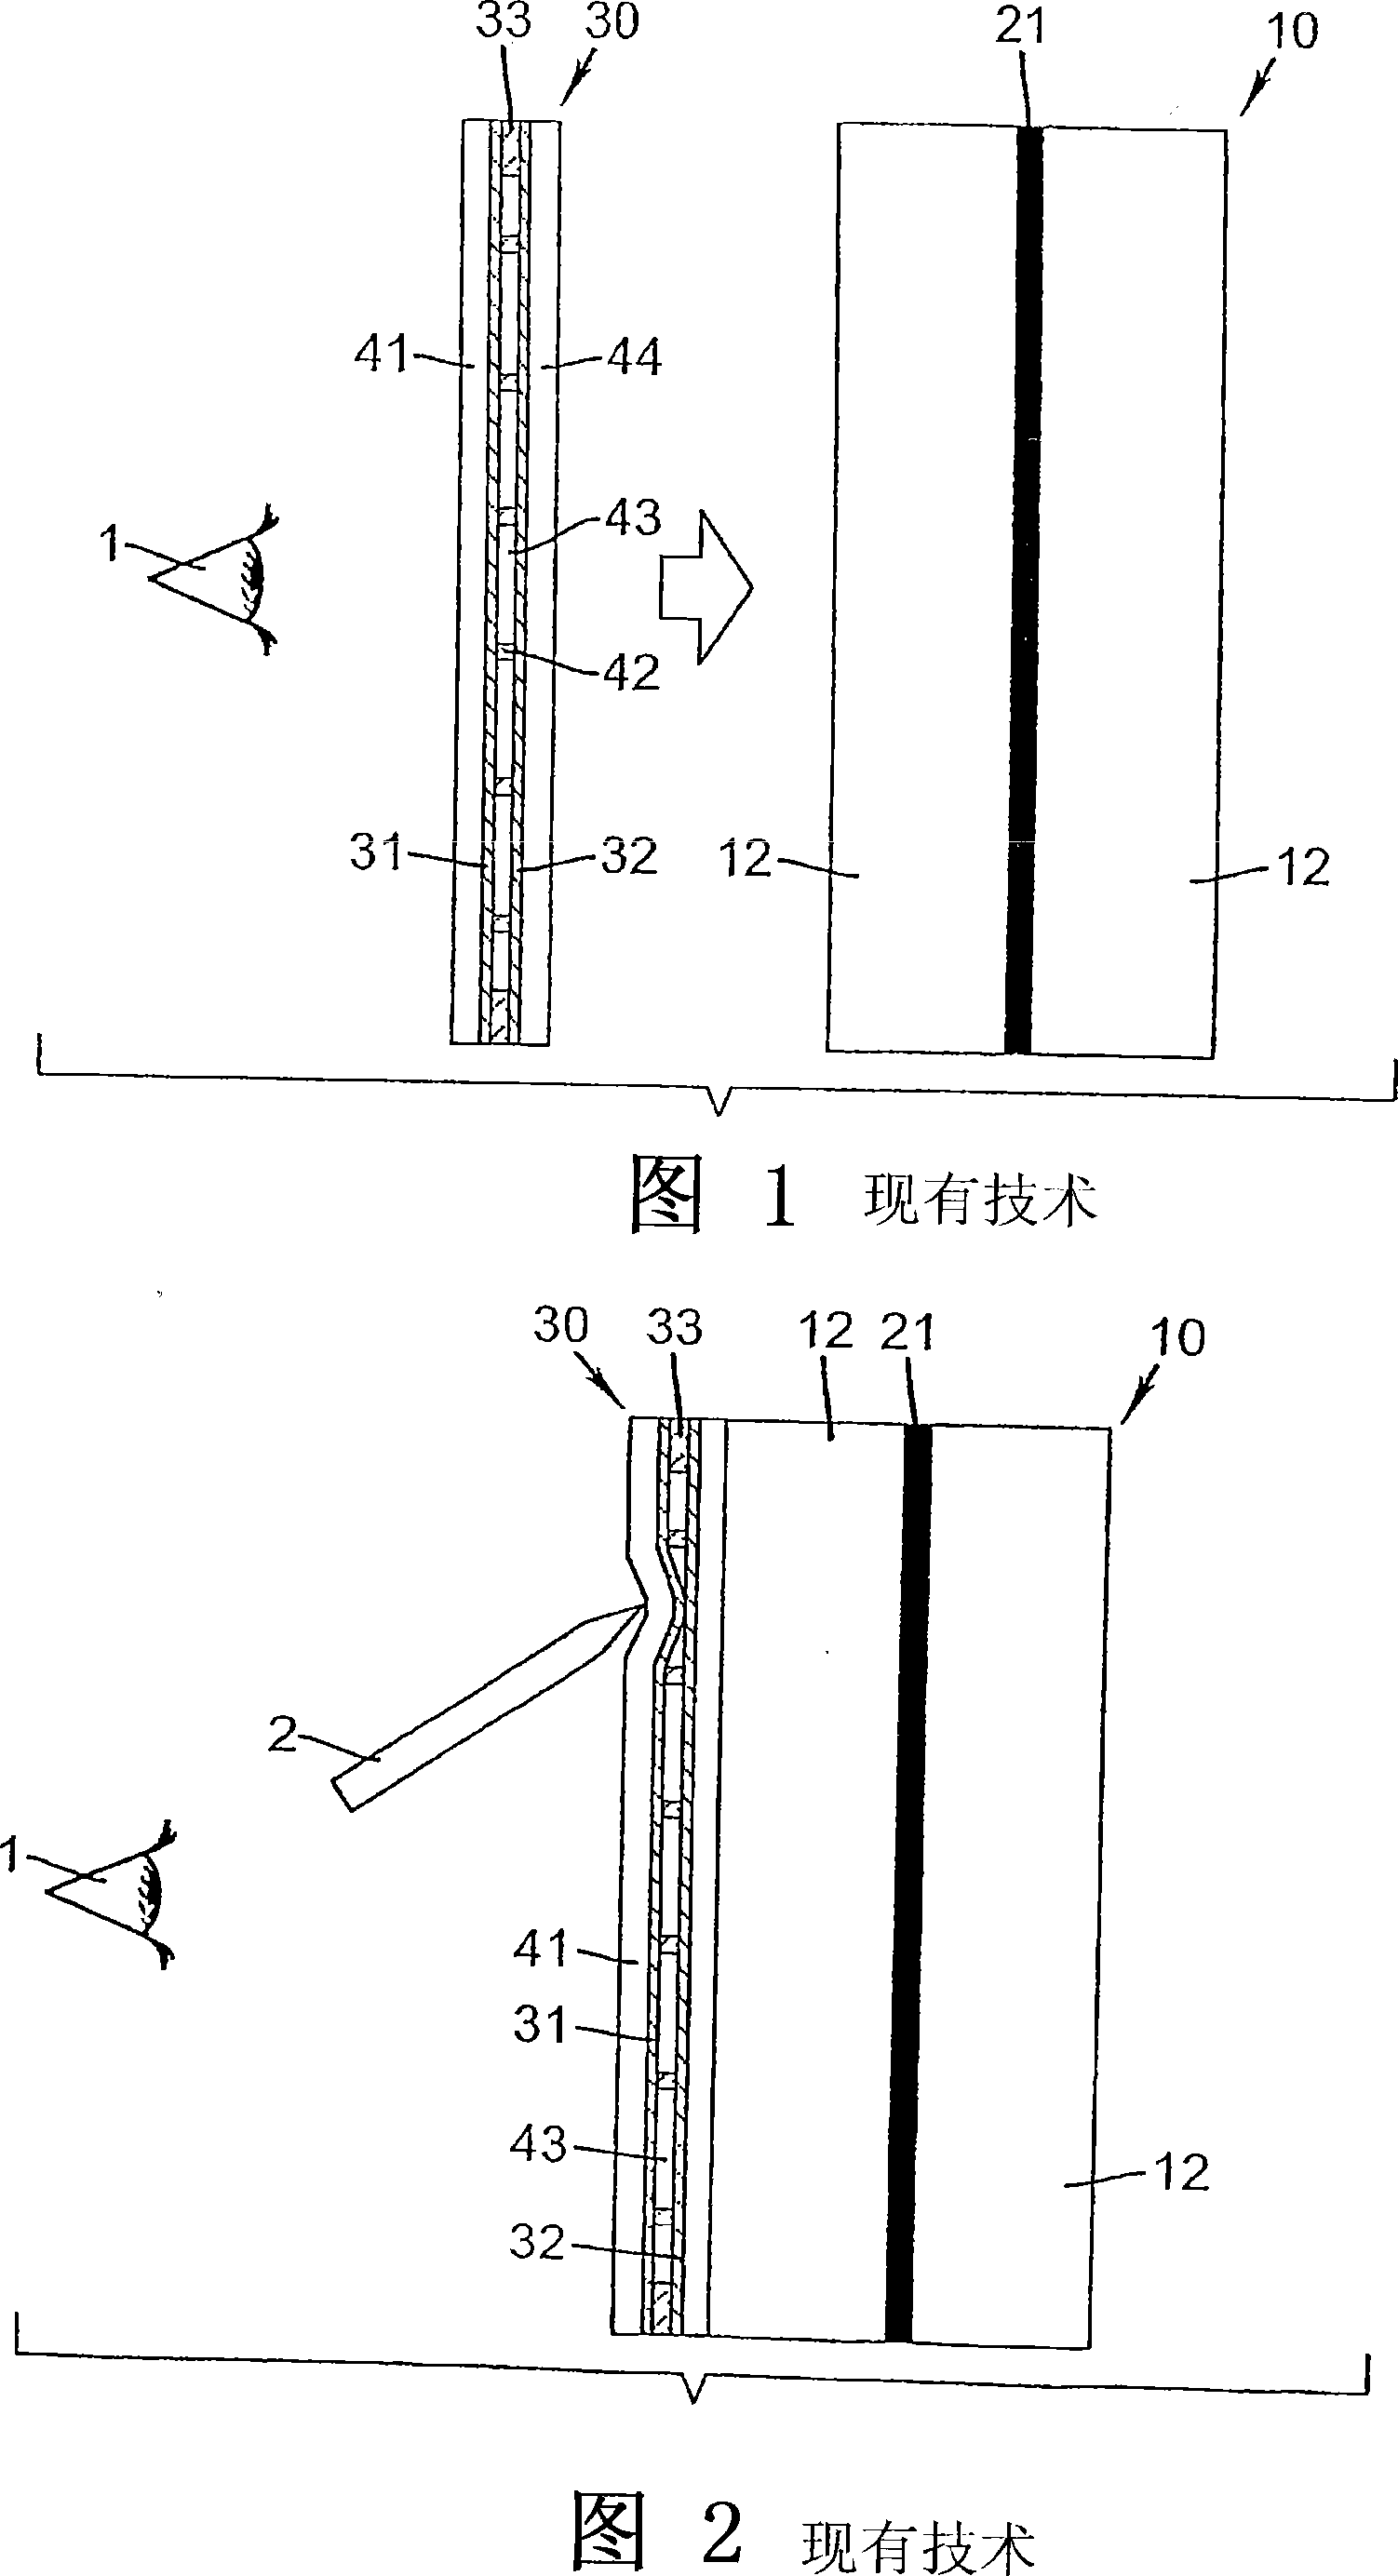 Method for making a display with integrated touchscreen